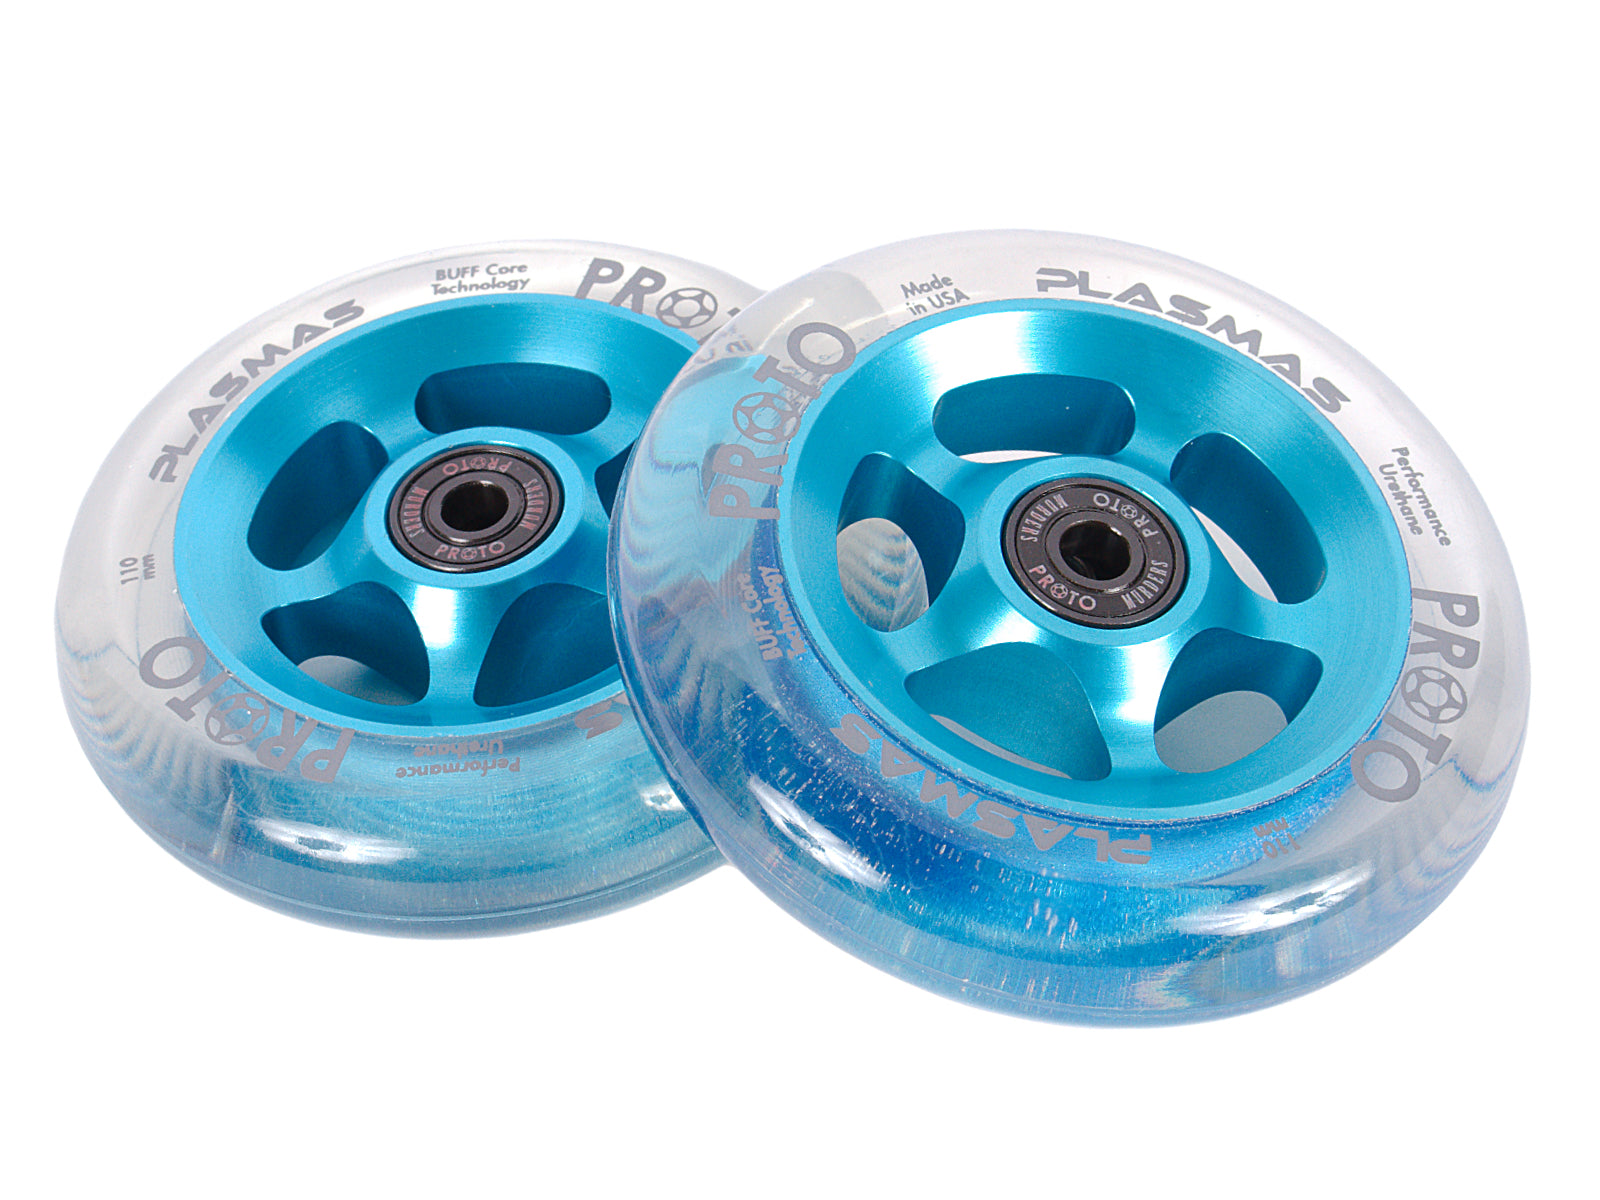 Proto Plasma 110mm Stunt Scooter Wheel - Clear / Electric Blue - Pair